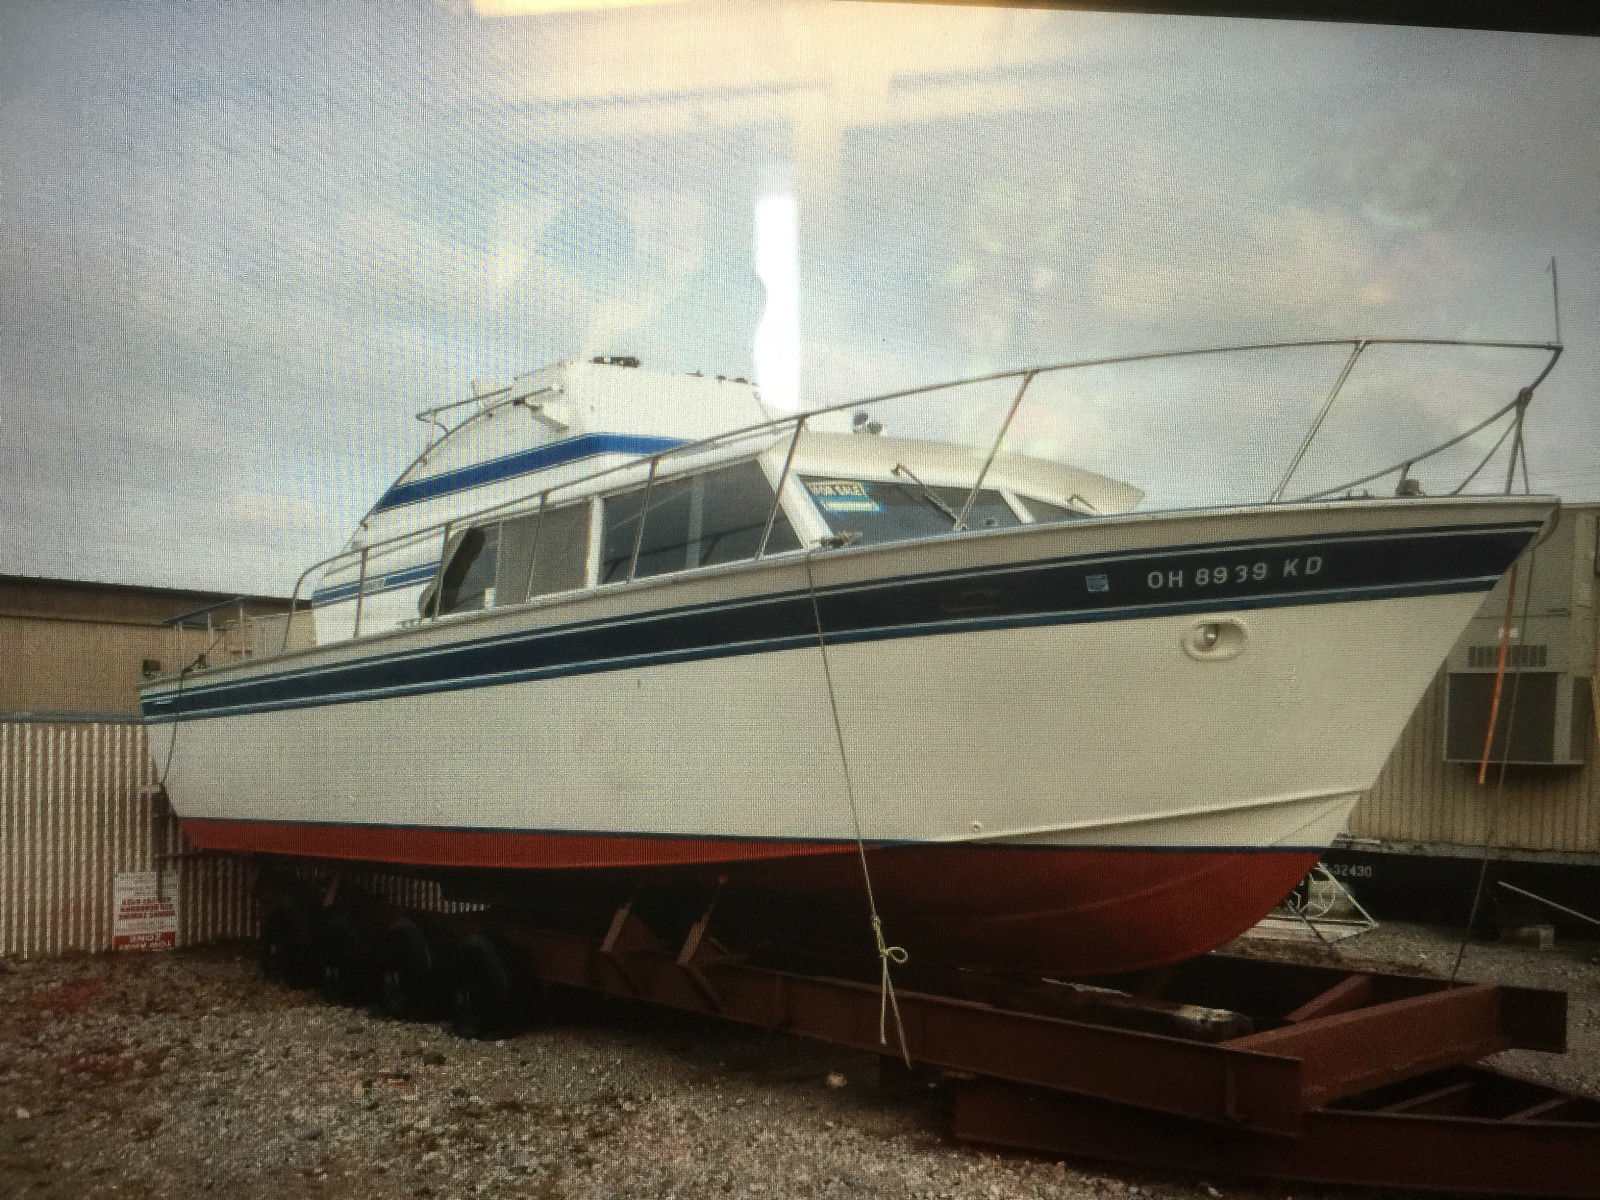 Marinette 32' Fisherman With Trailer boat for sale from USA